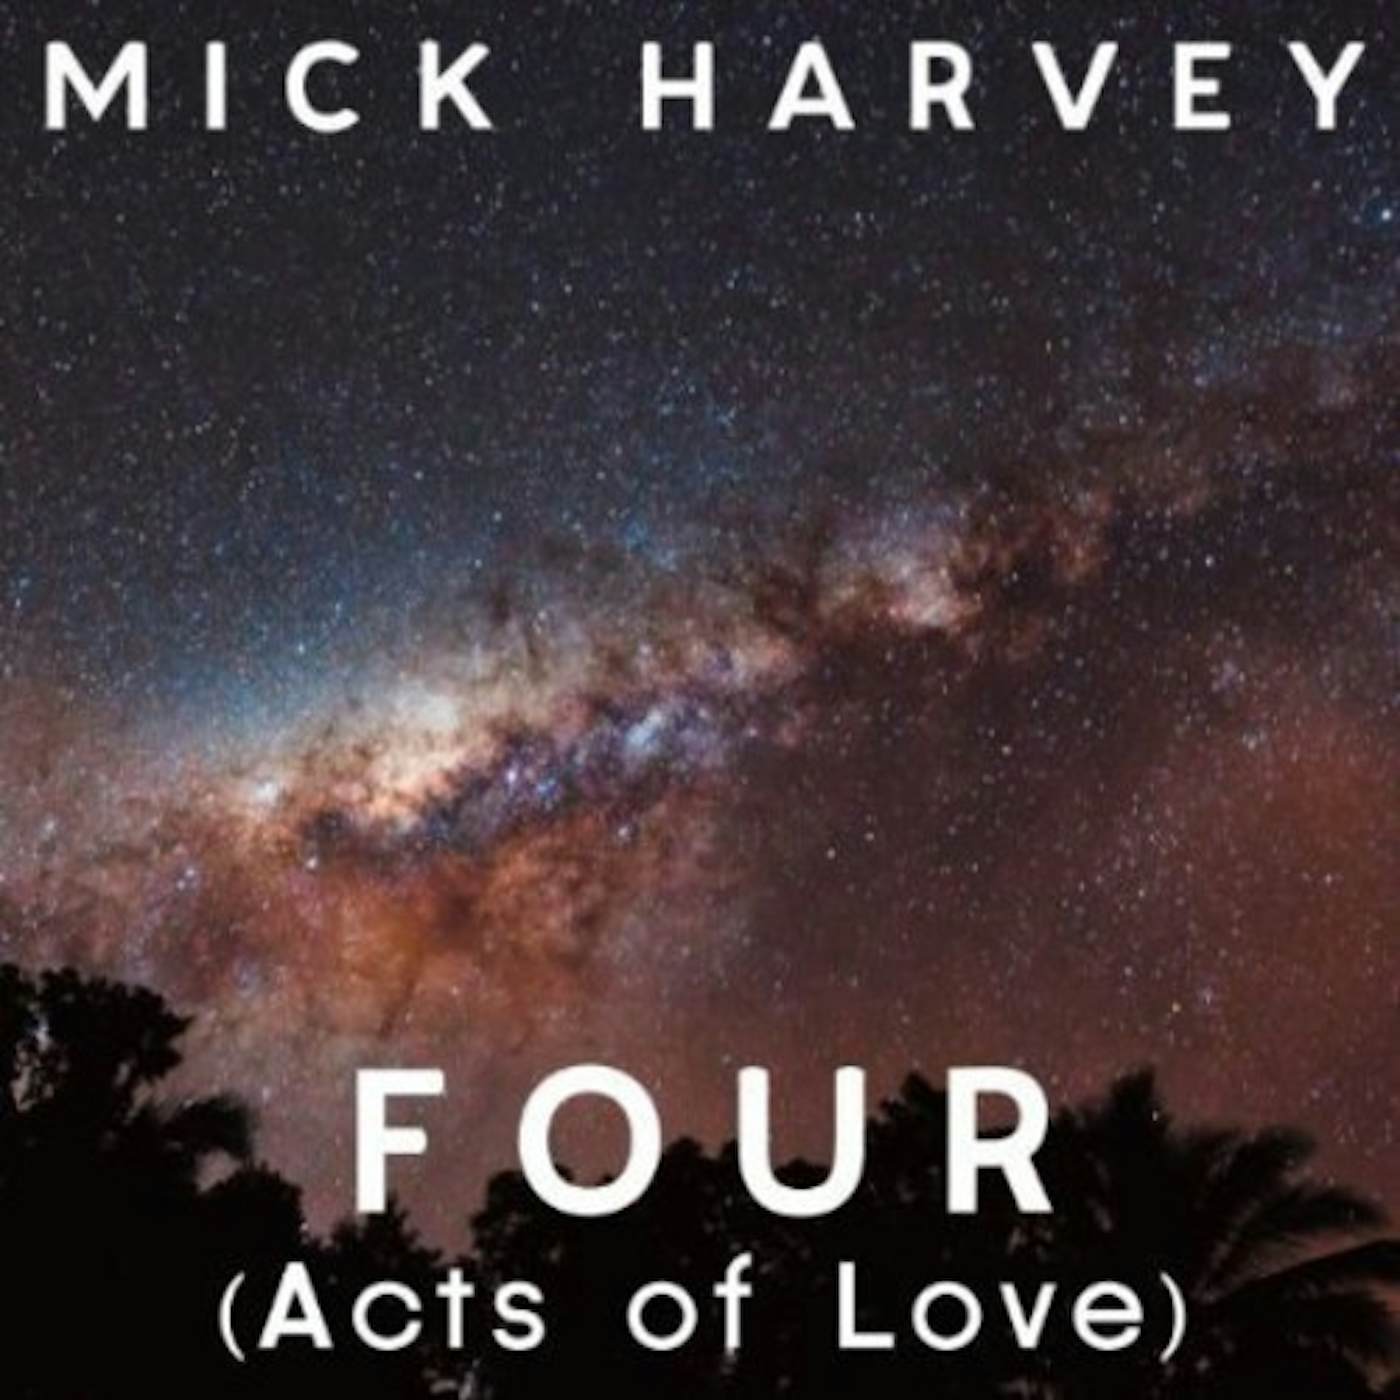 Mick Harvey FOUR (Acts of Love) Vinyl Record